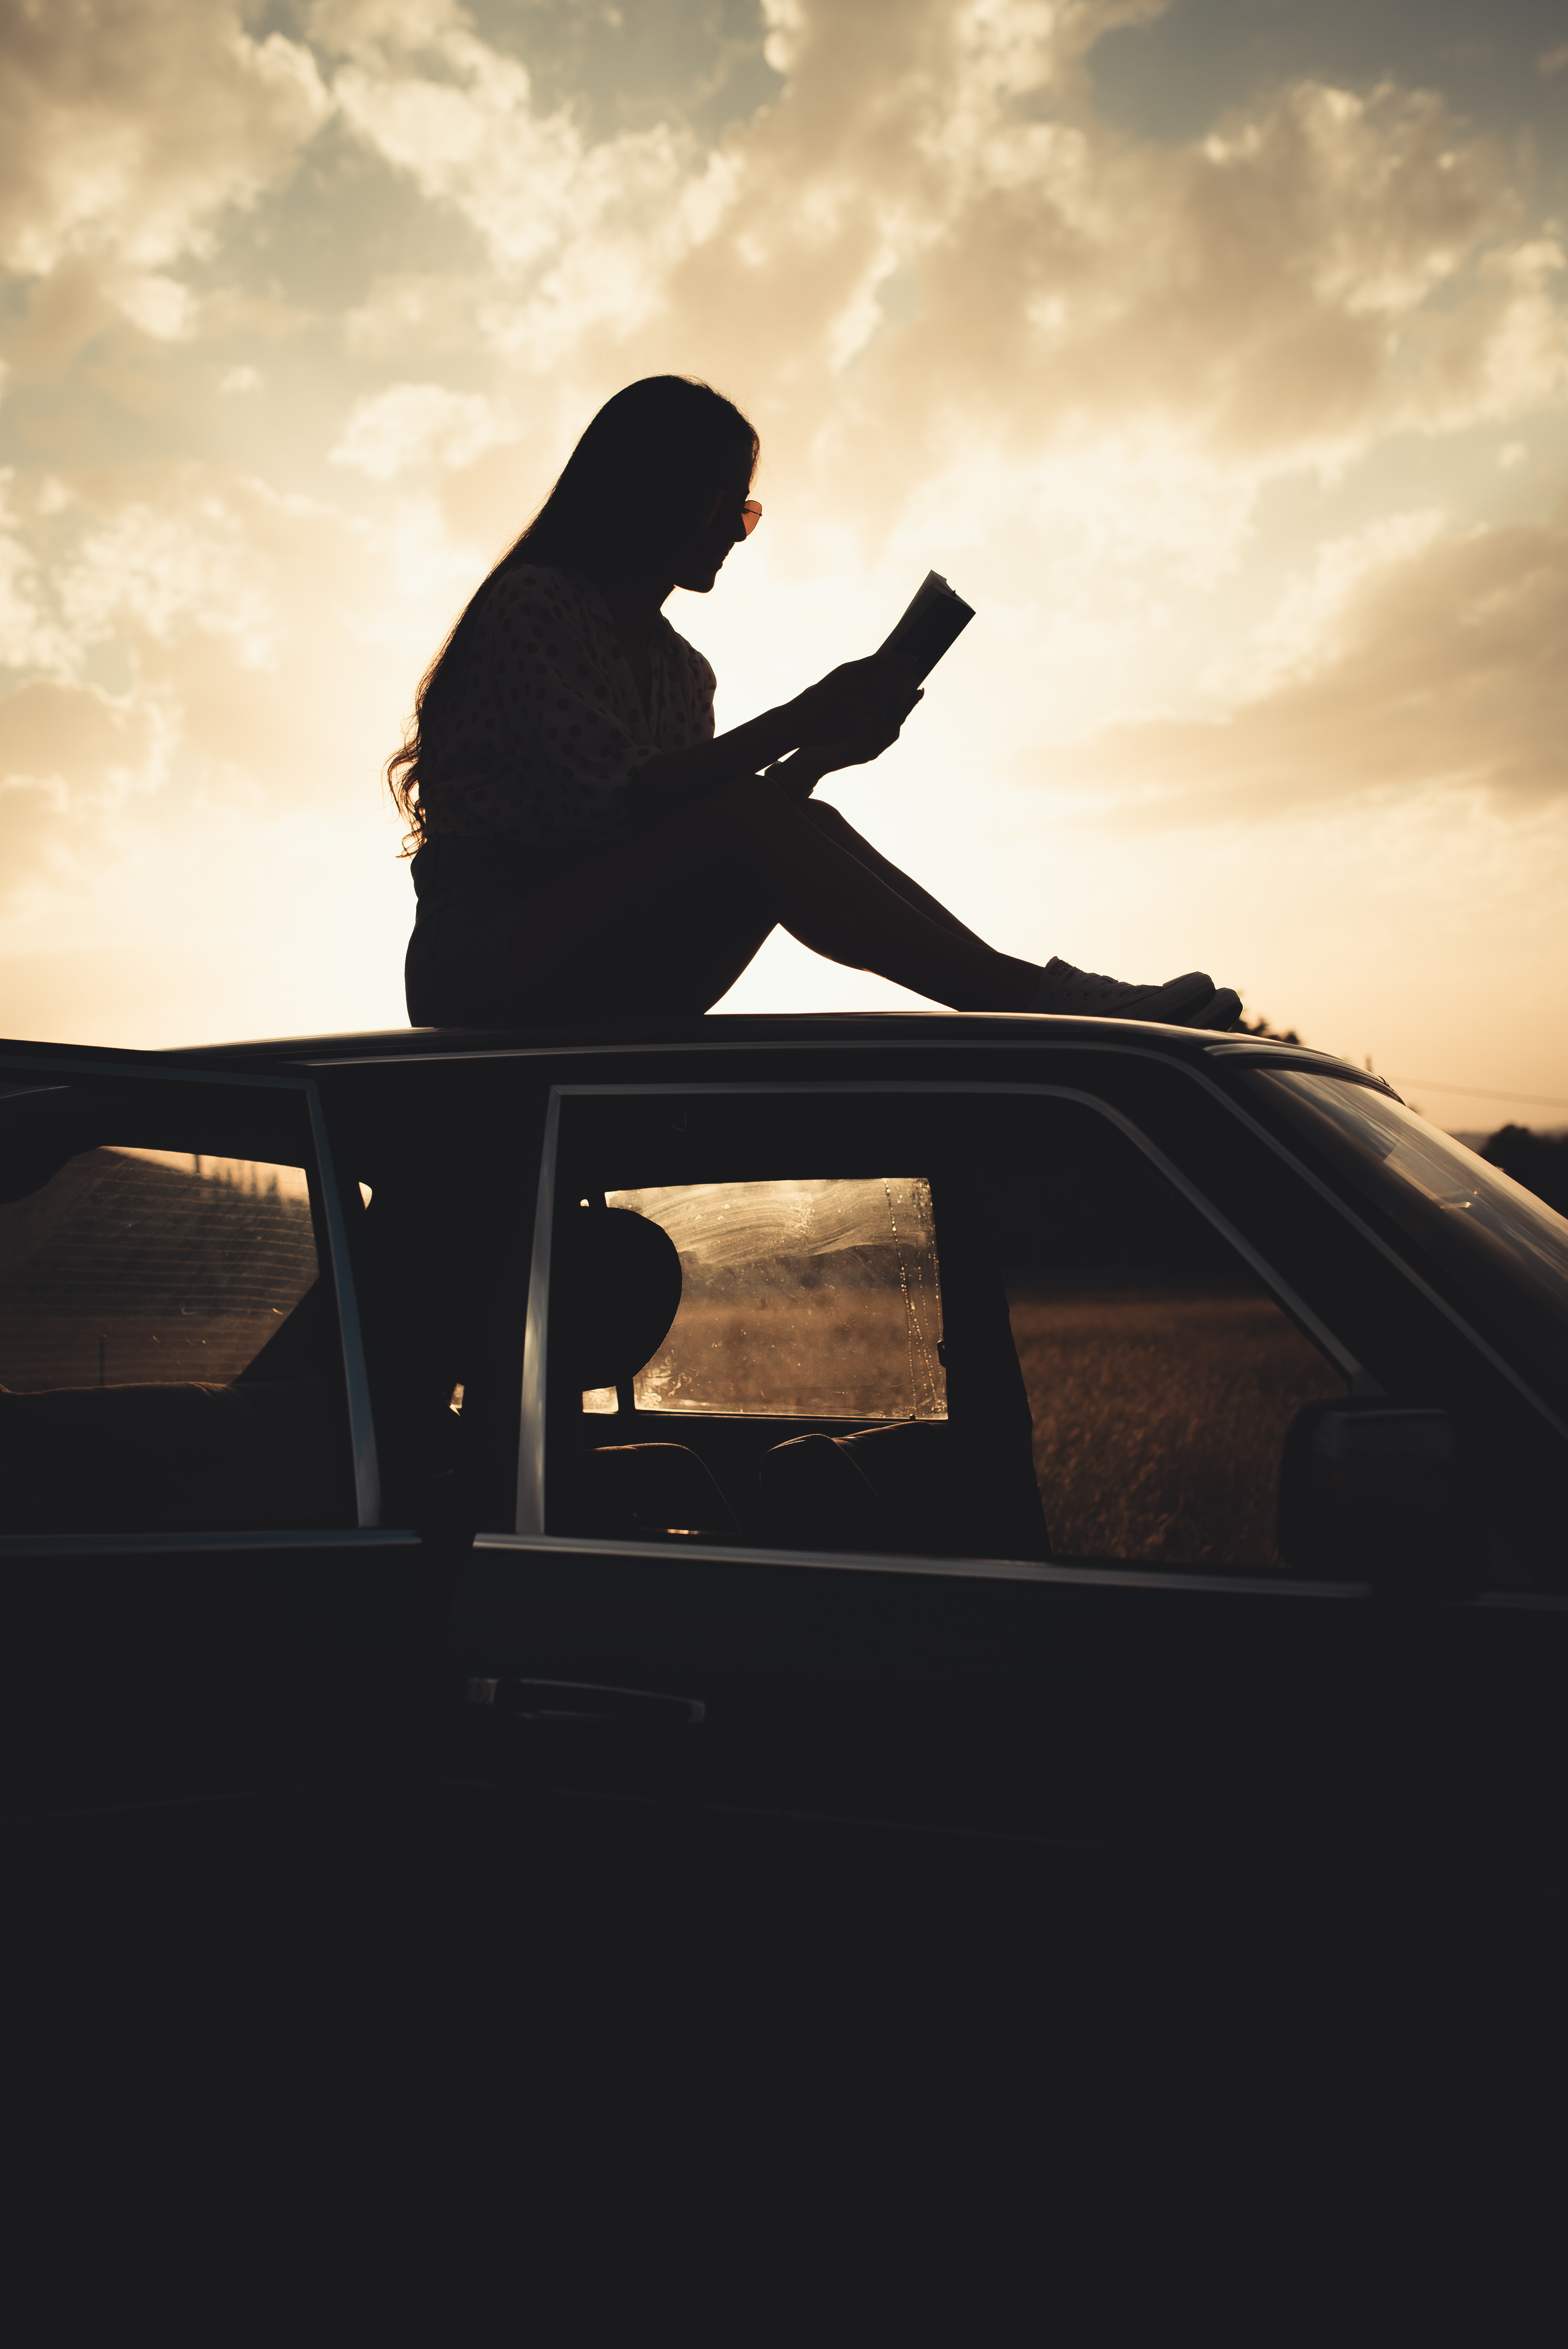 140646 download wallpaper books, dark, silhouette, car, machine, girl, reading screensavers and pictures for free